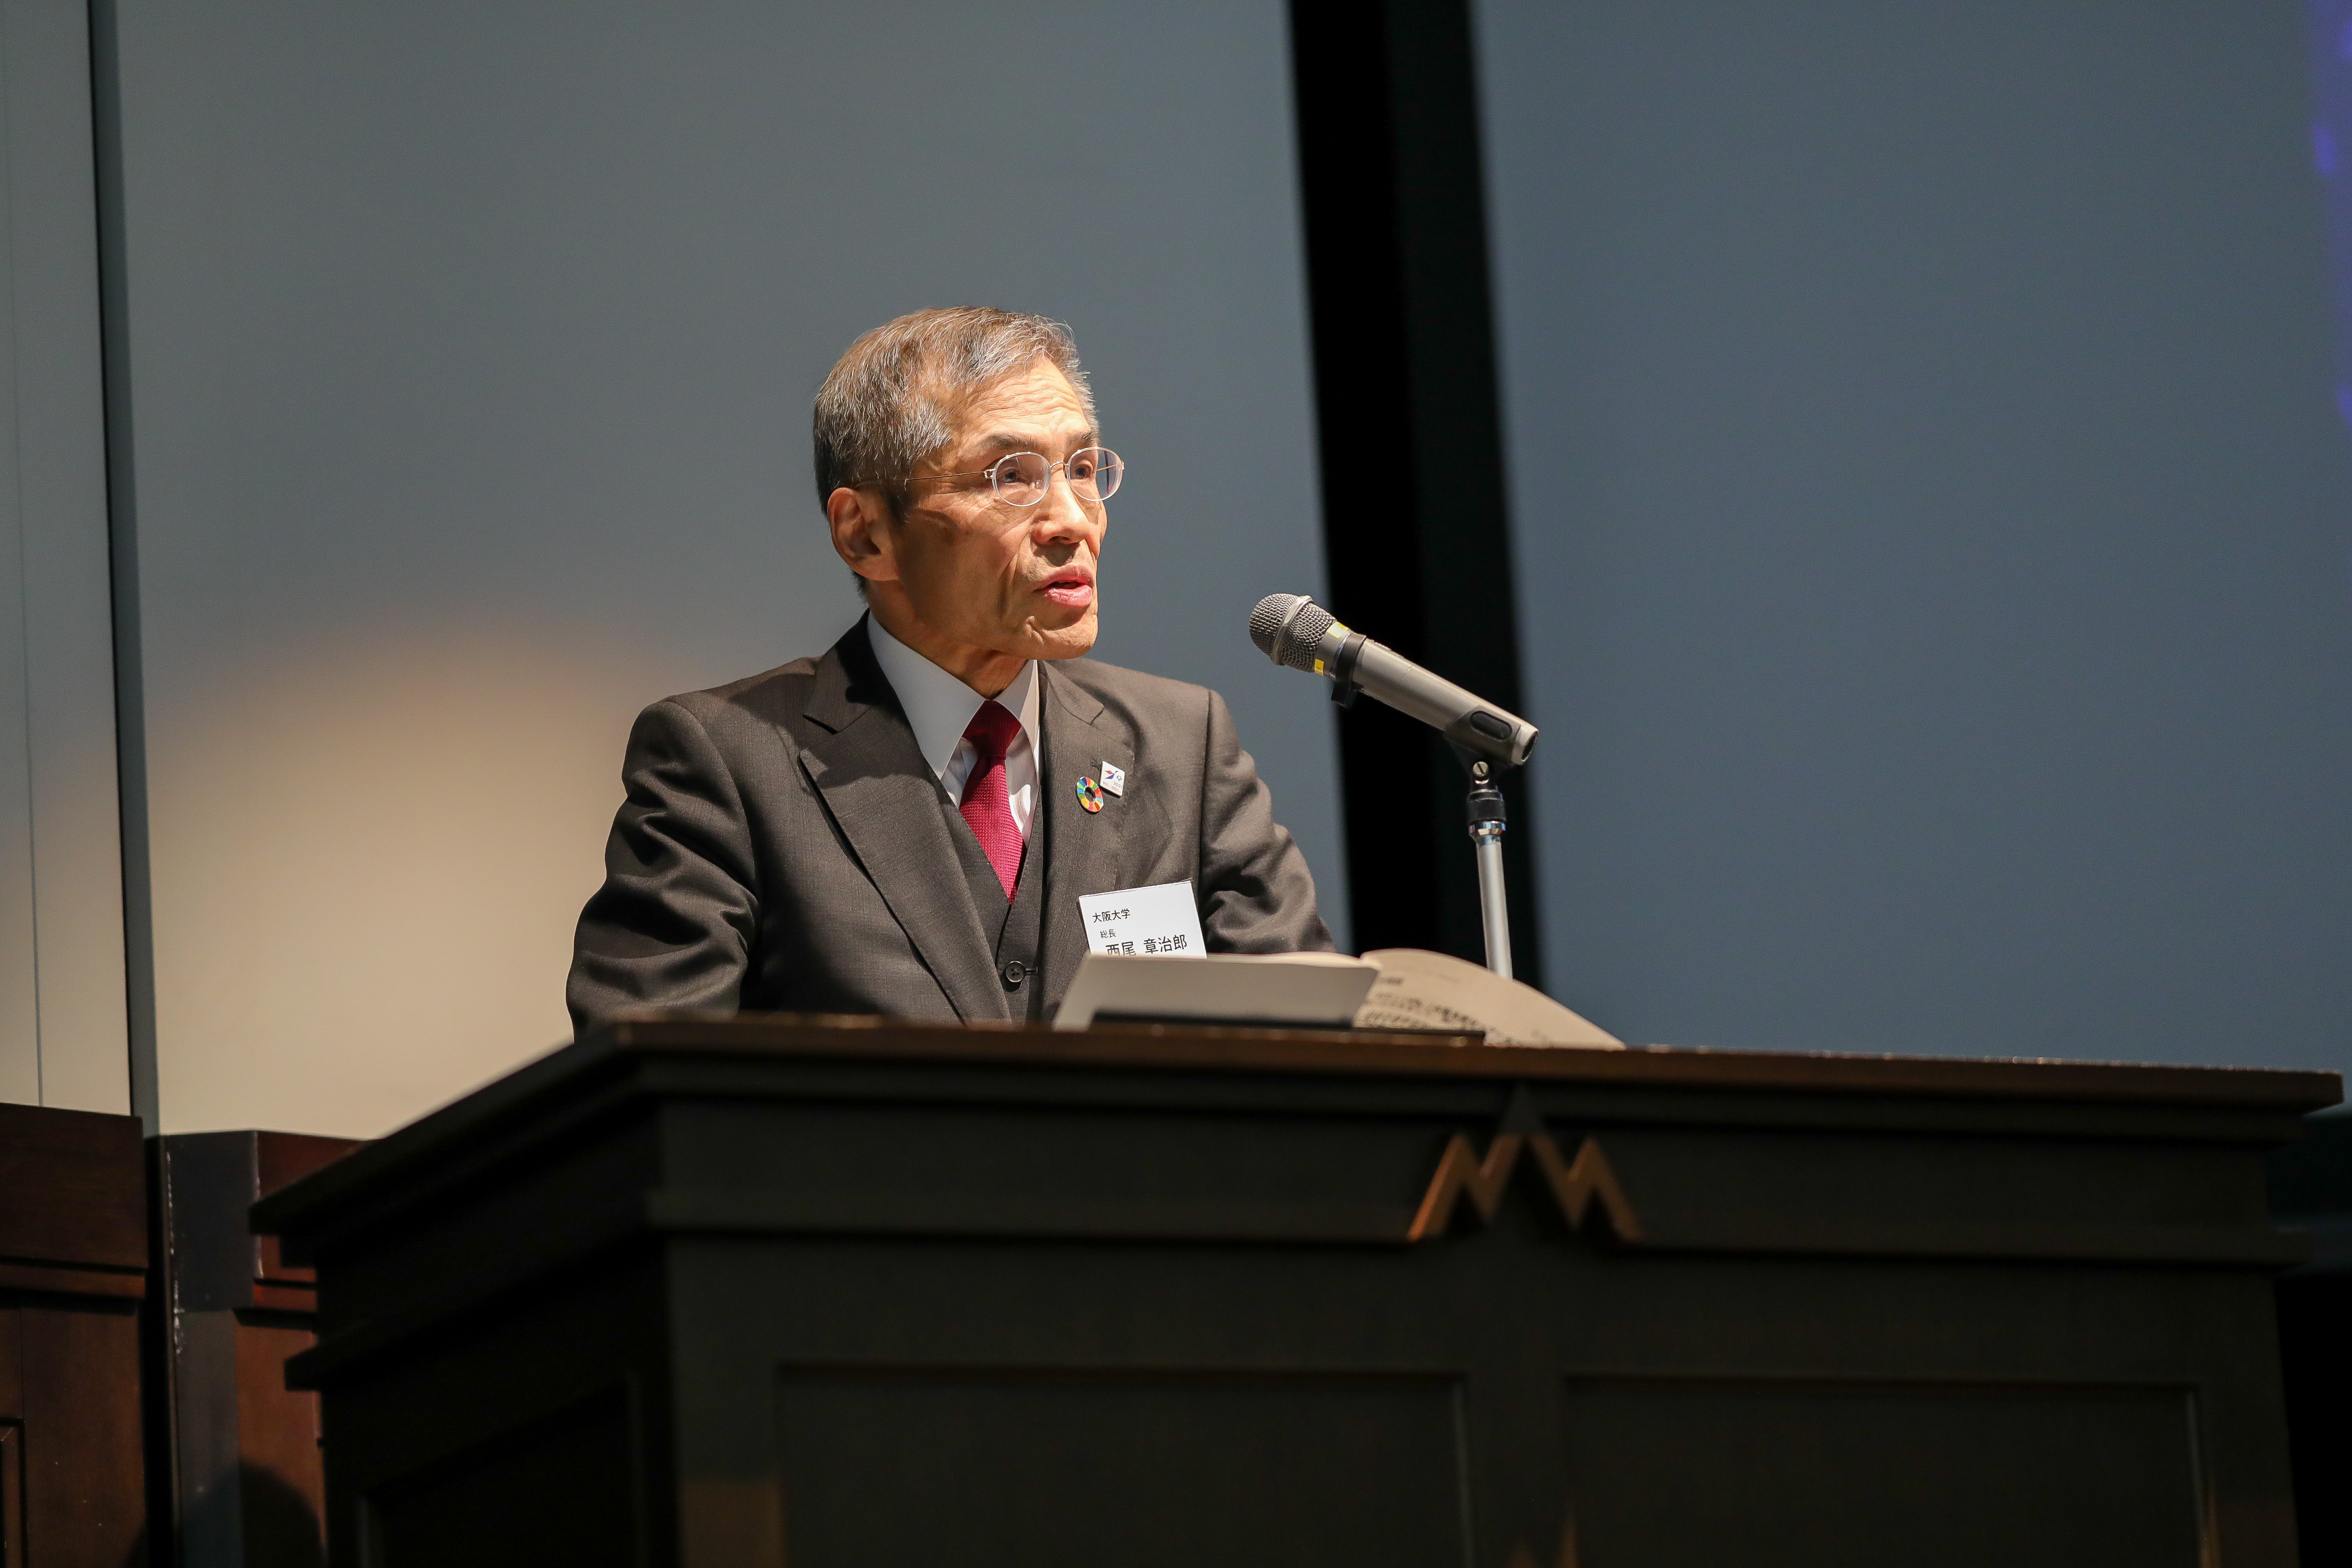 130 Individuals in Attendance at Osaka University Leaders Forum